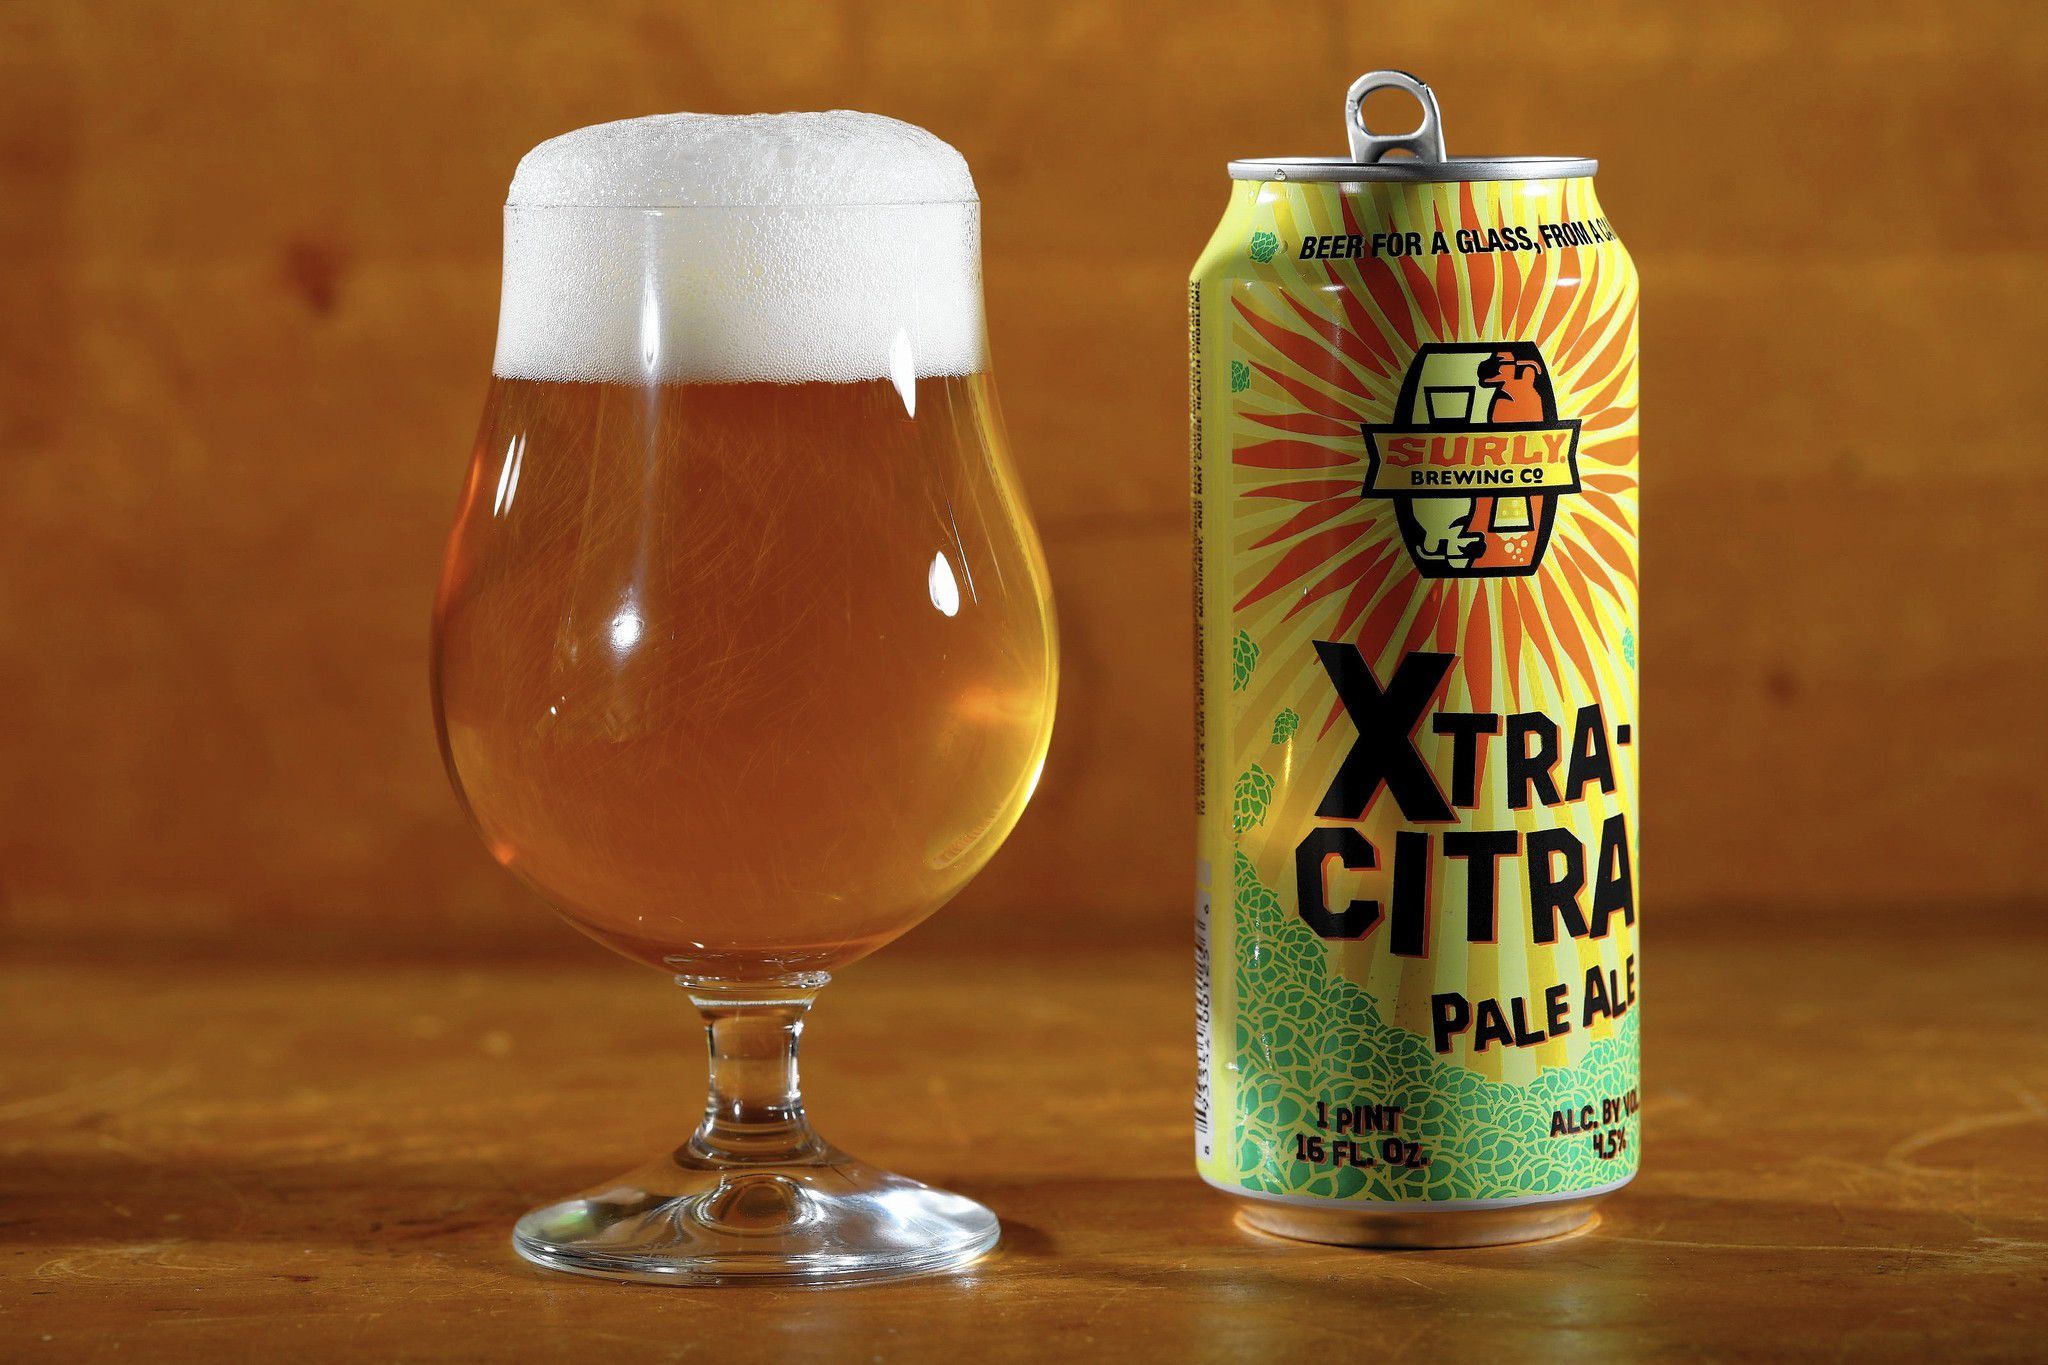 Xtra - Surly Brewing Co.